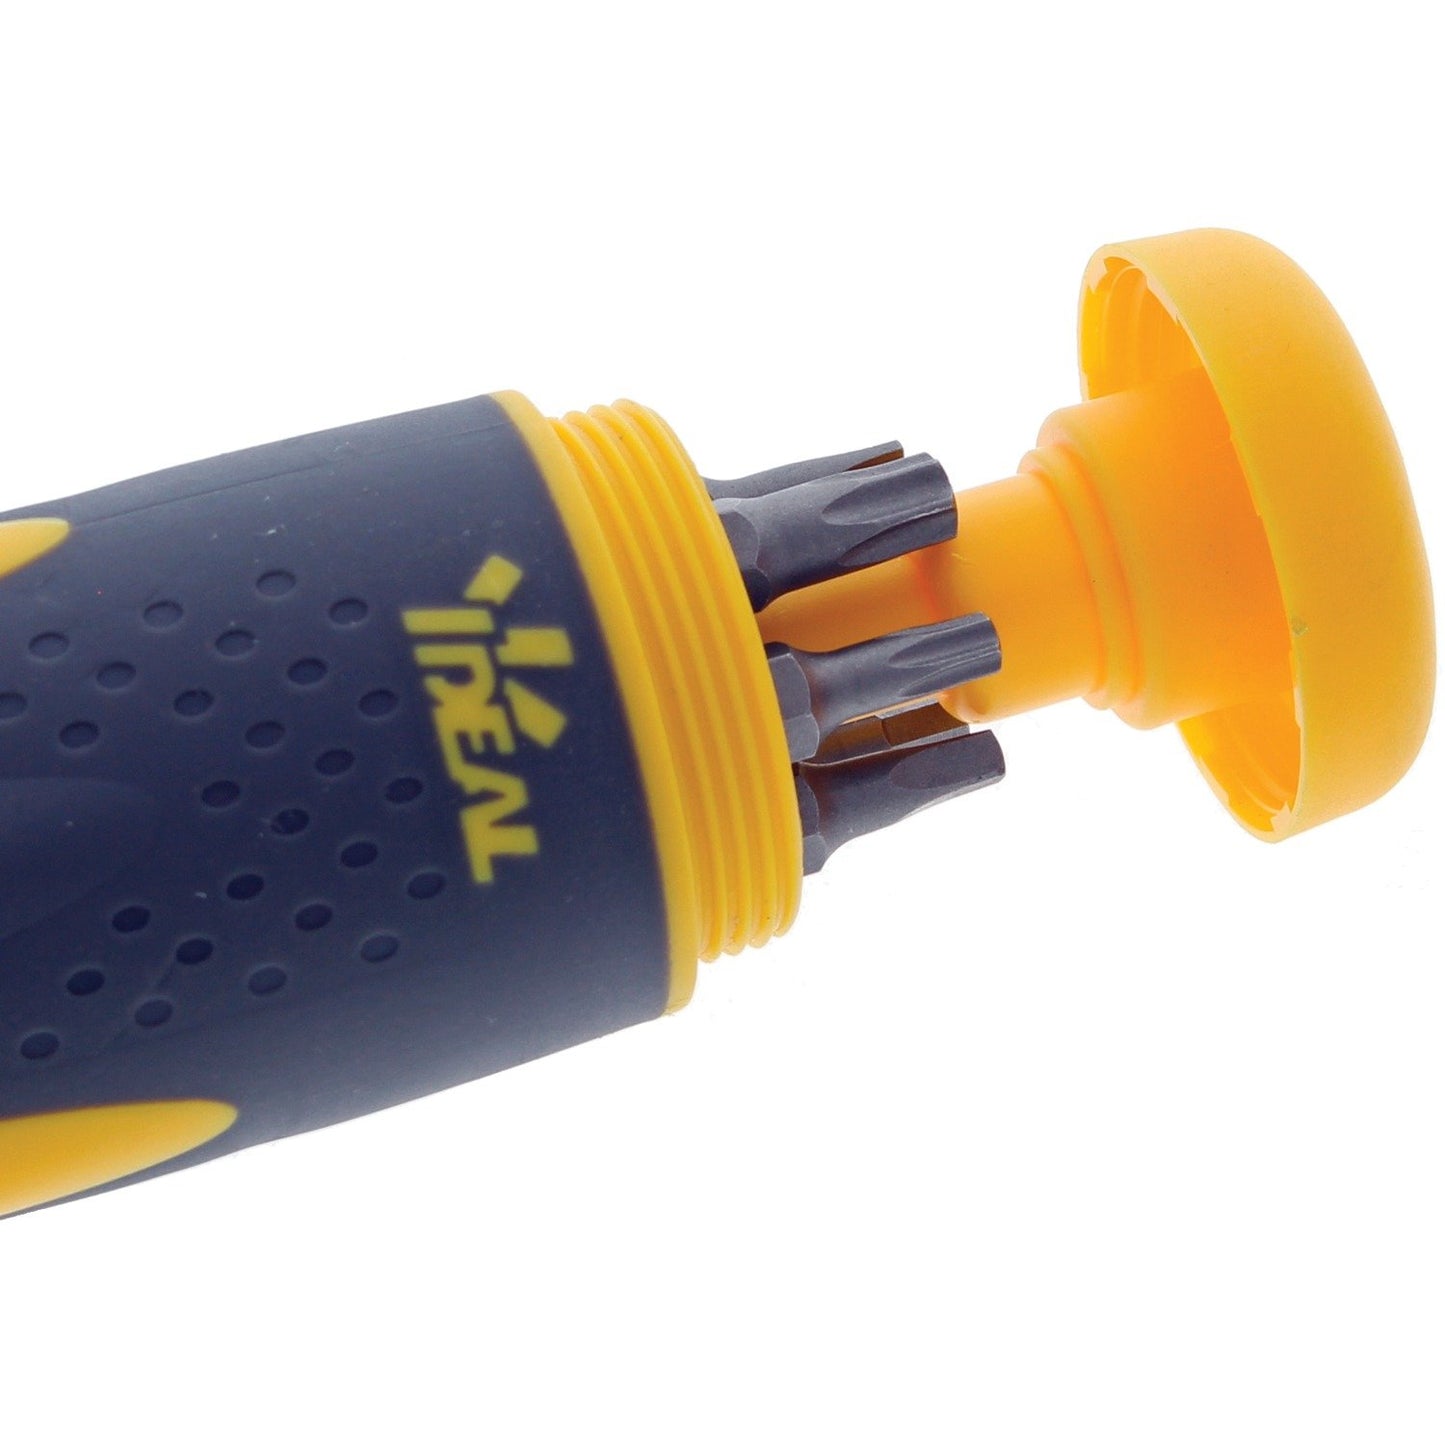 IDEAL 35-688 21-in-1 Twist-A-Nut™ Ratcheting Screwdriver